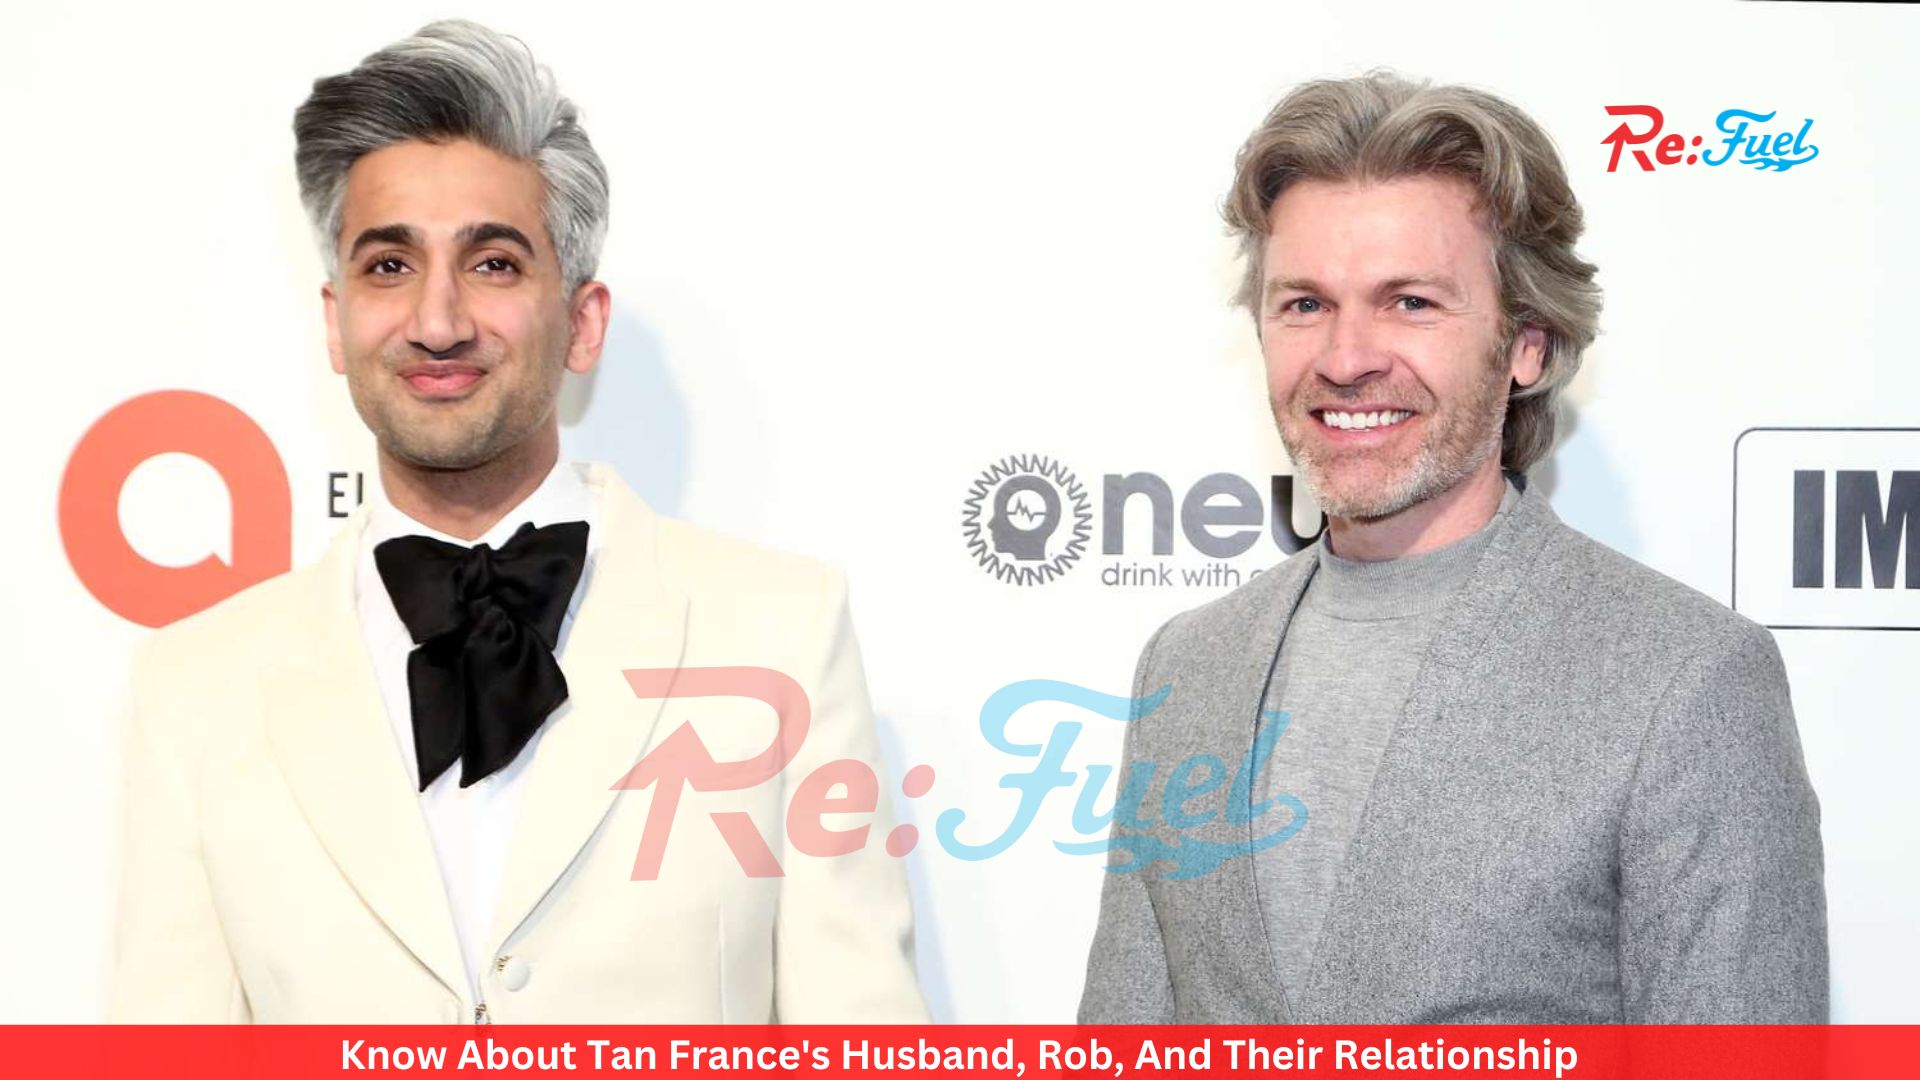 Know About Tan France's Husband, Rob, And Their Relationship